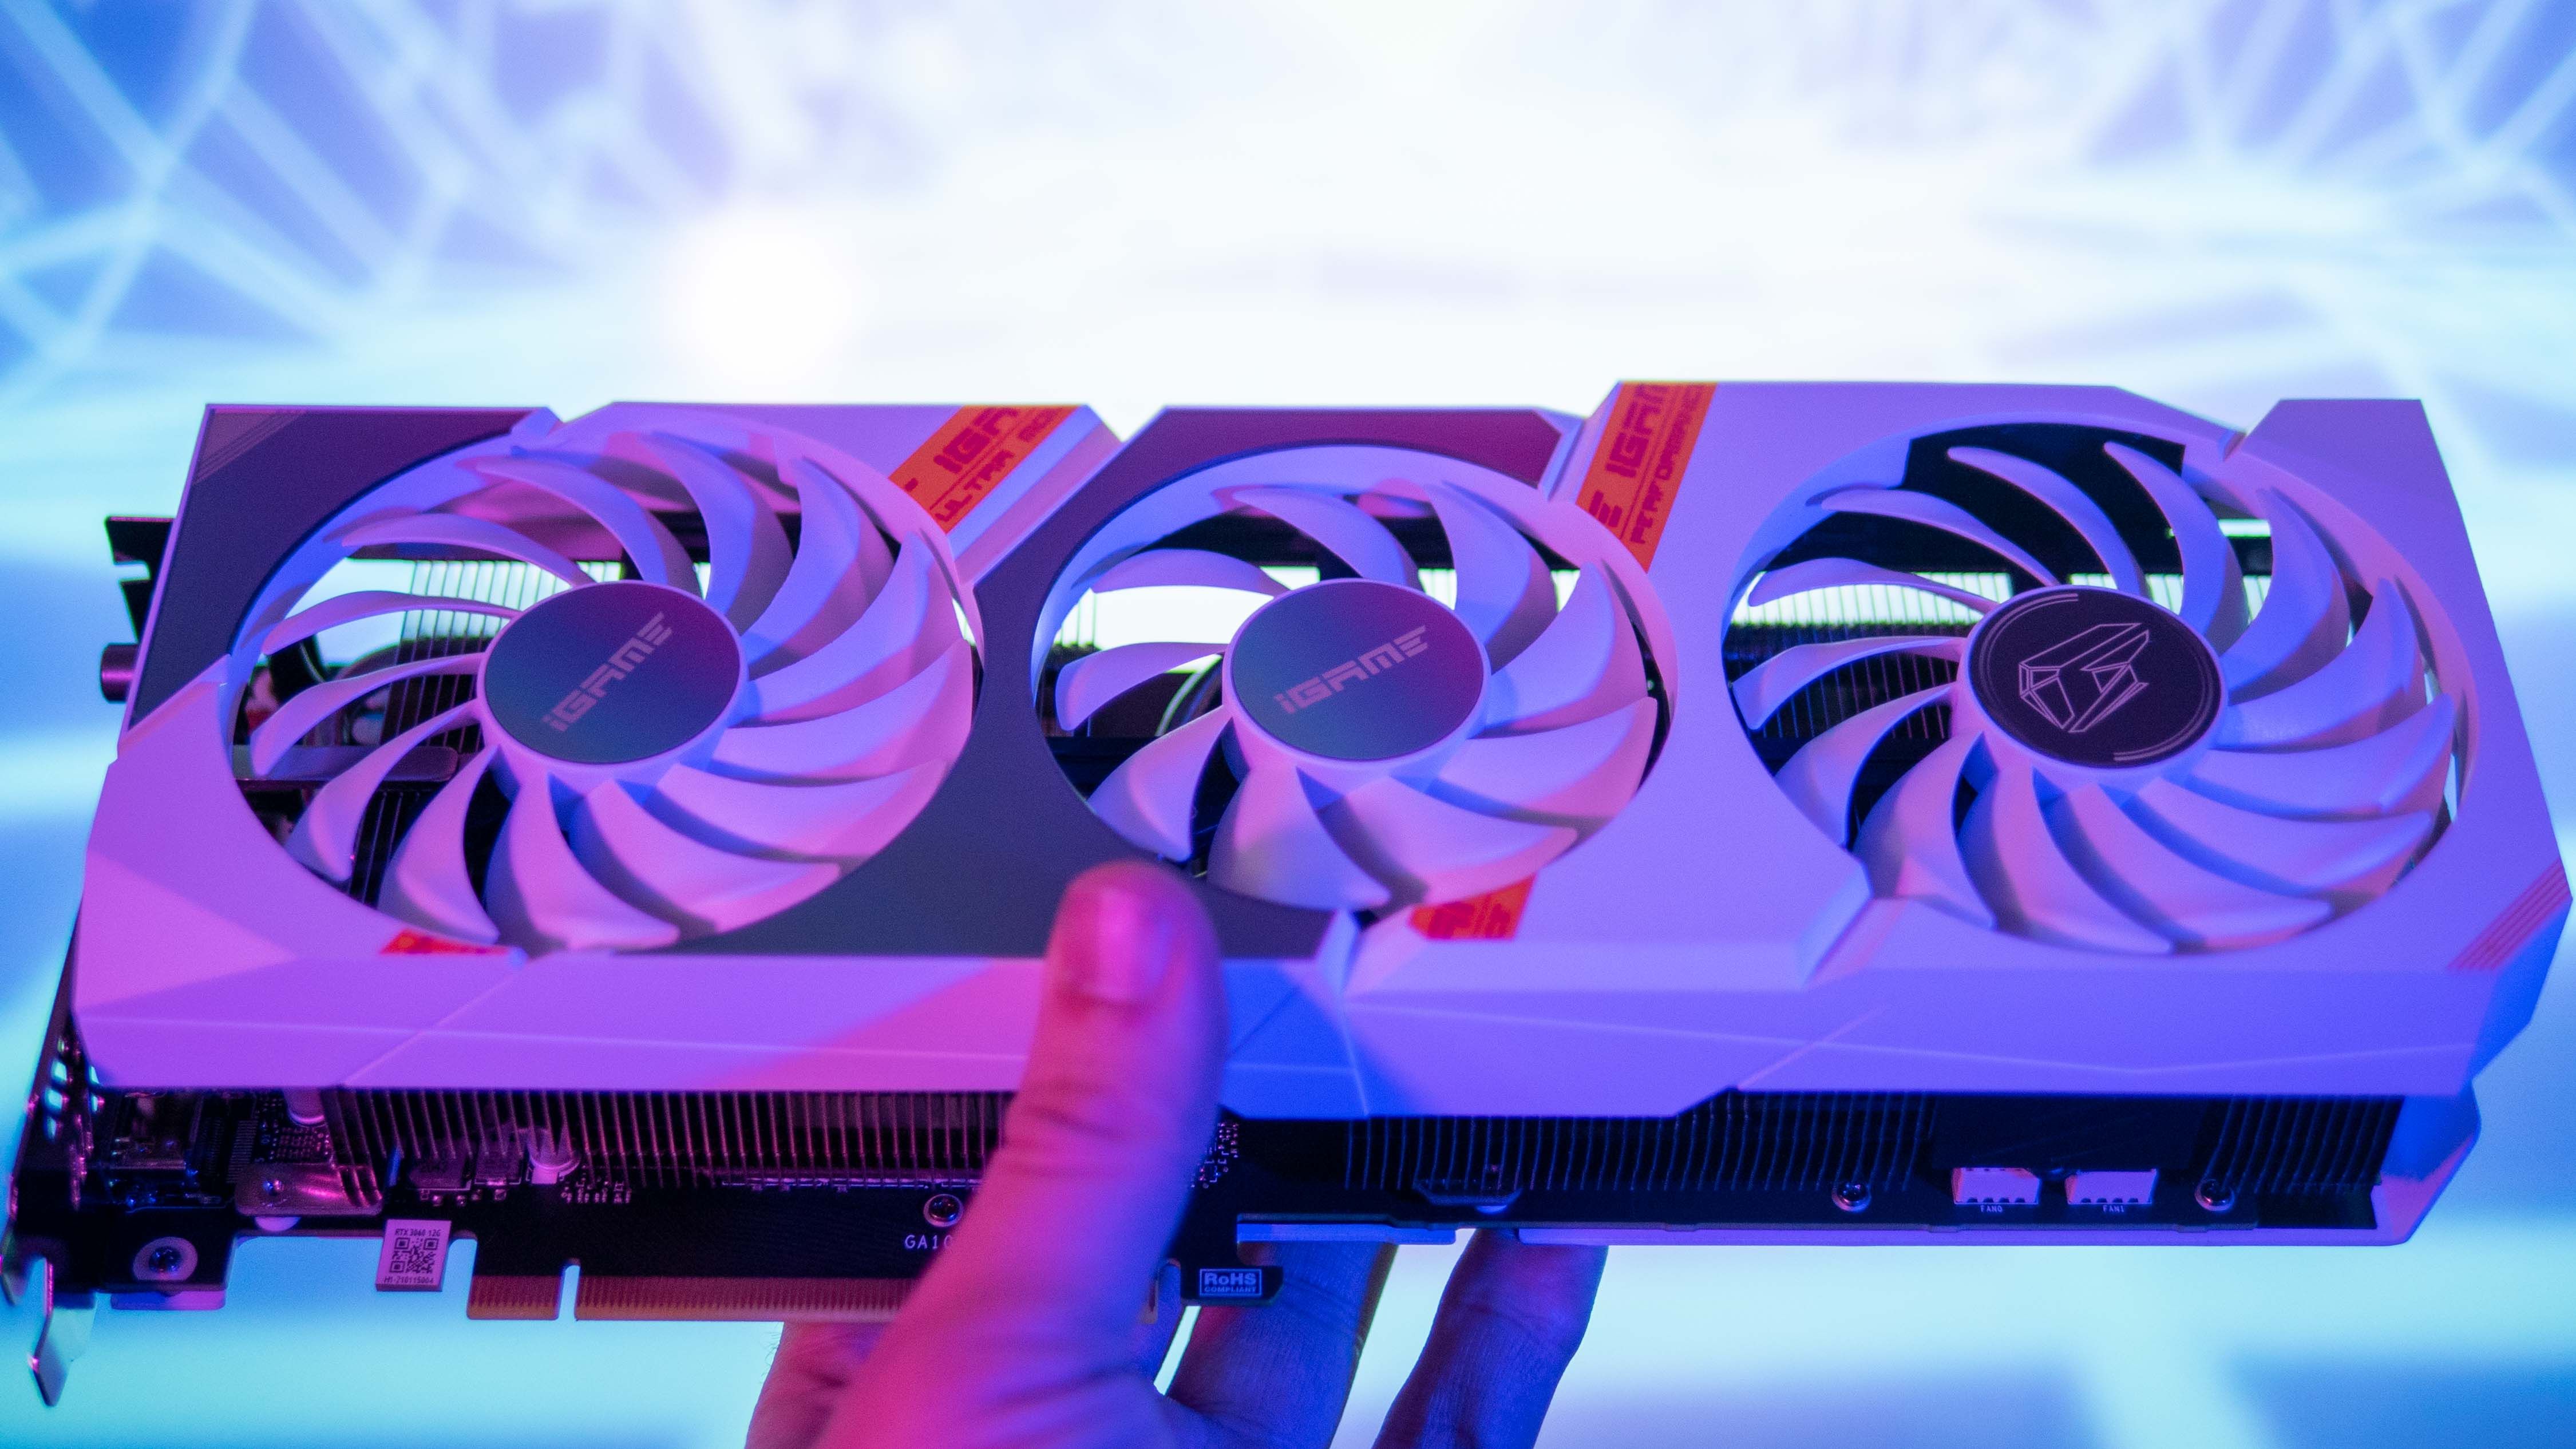 iGame RTX 3060 Ultra W OC Review: Next Gen Graphics at an Affordable Price